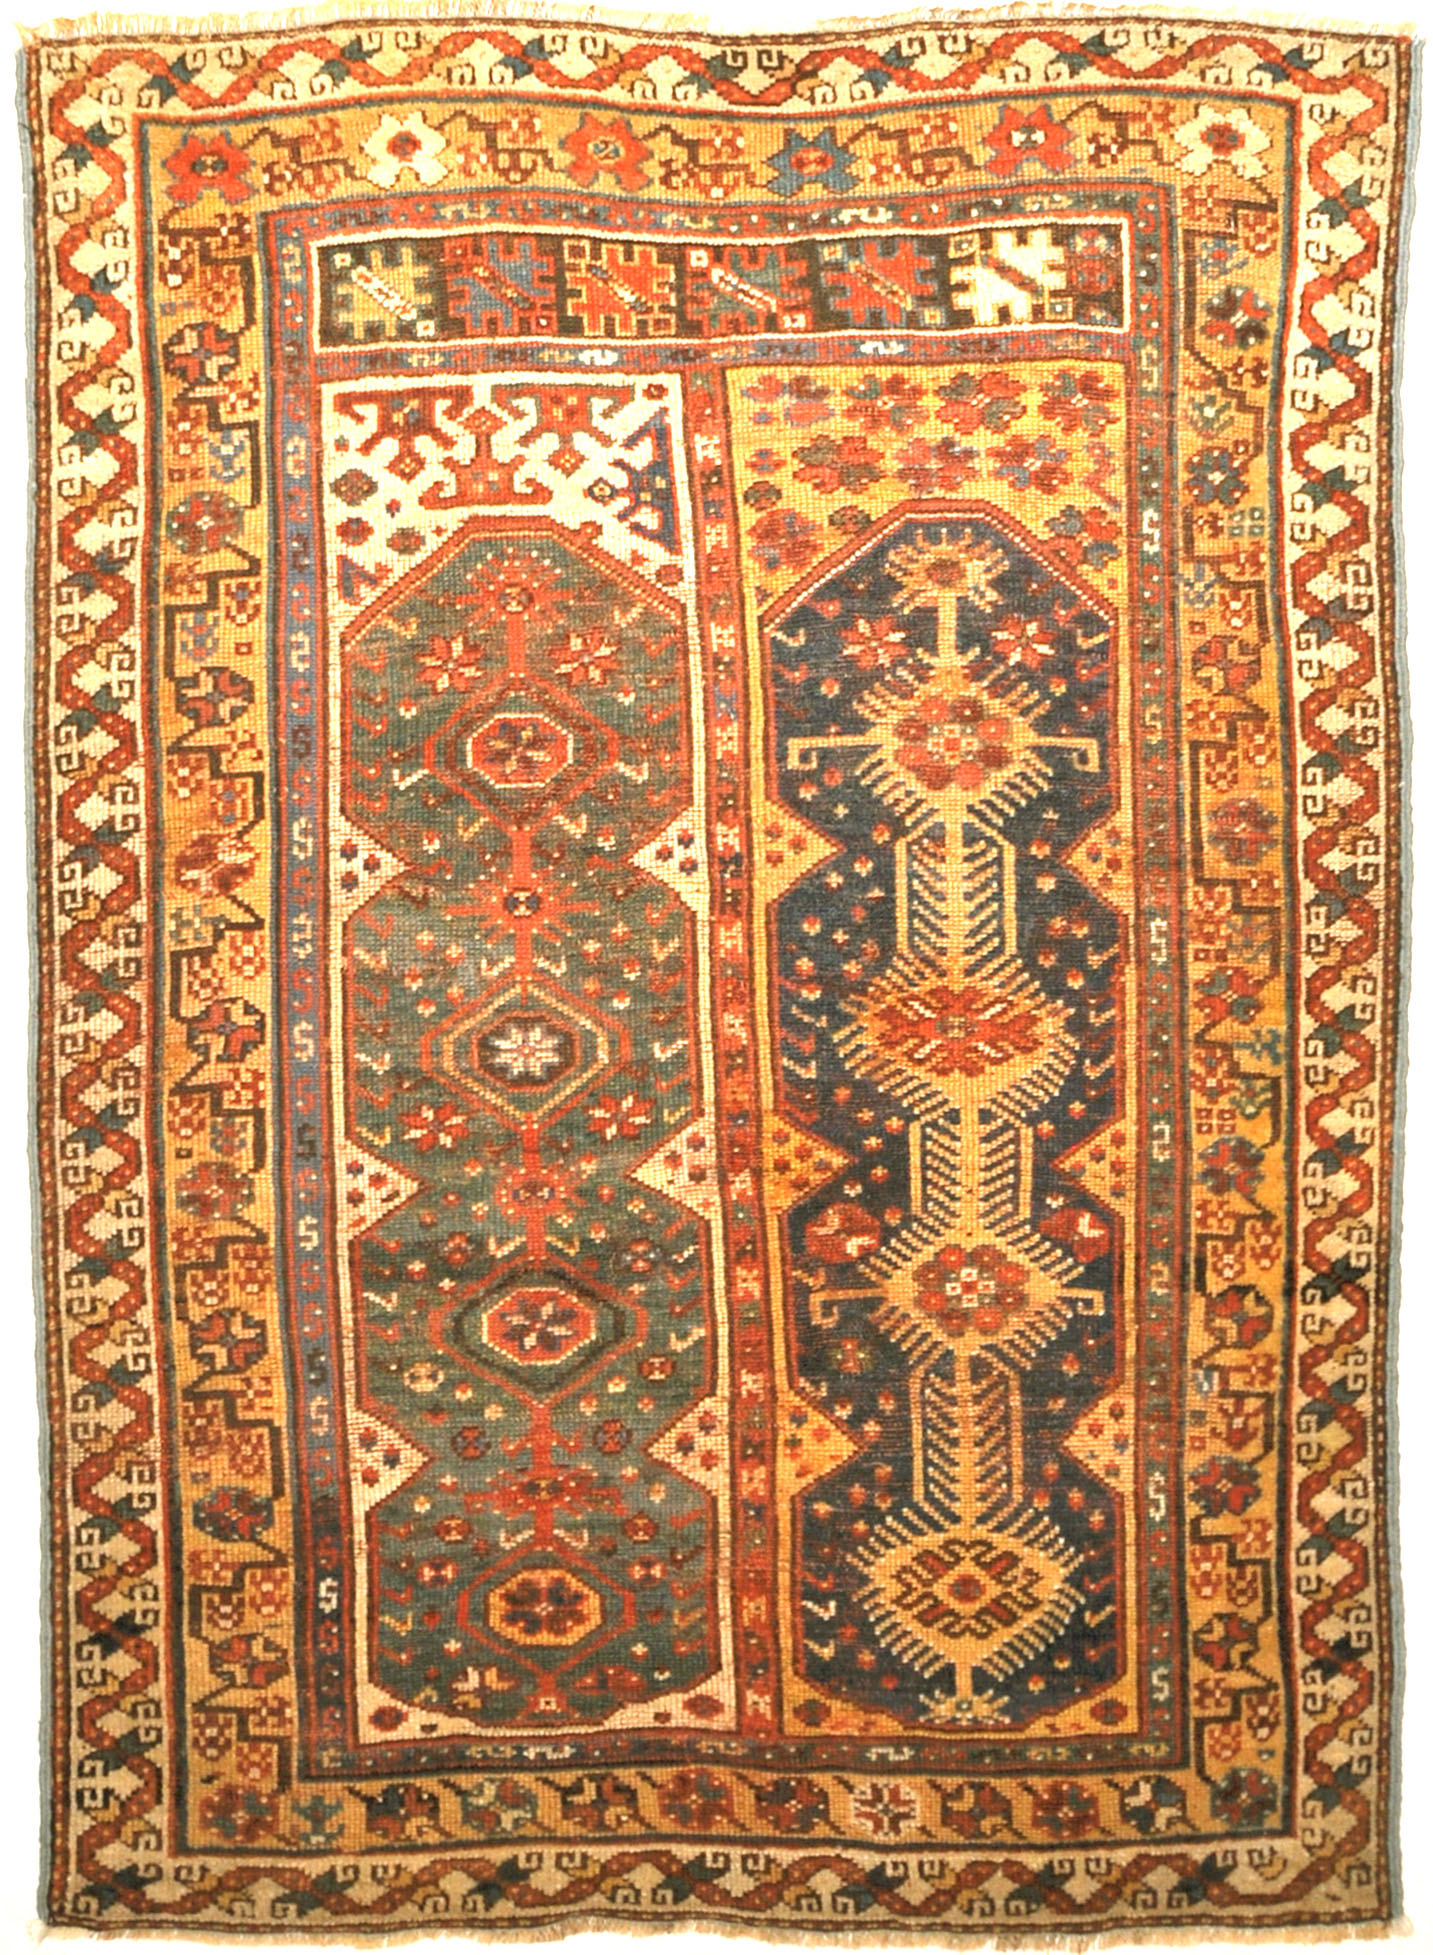 Rare Antique Turkish Tribal Makri Rug. A piece of genuine, woven carpet art sold by Santa Barbara Design Center, Rugs and More.